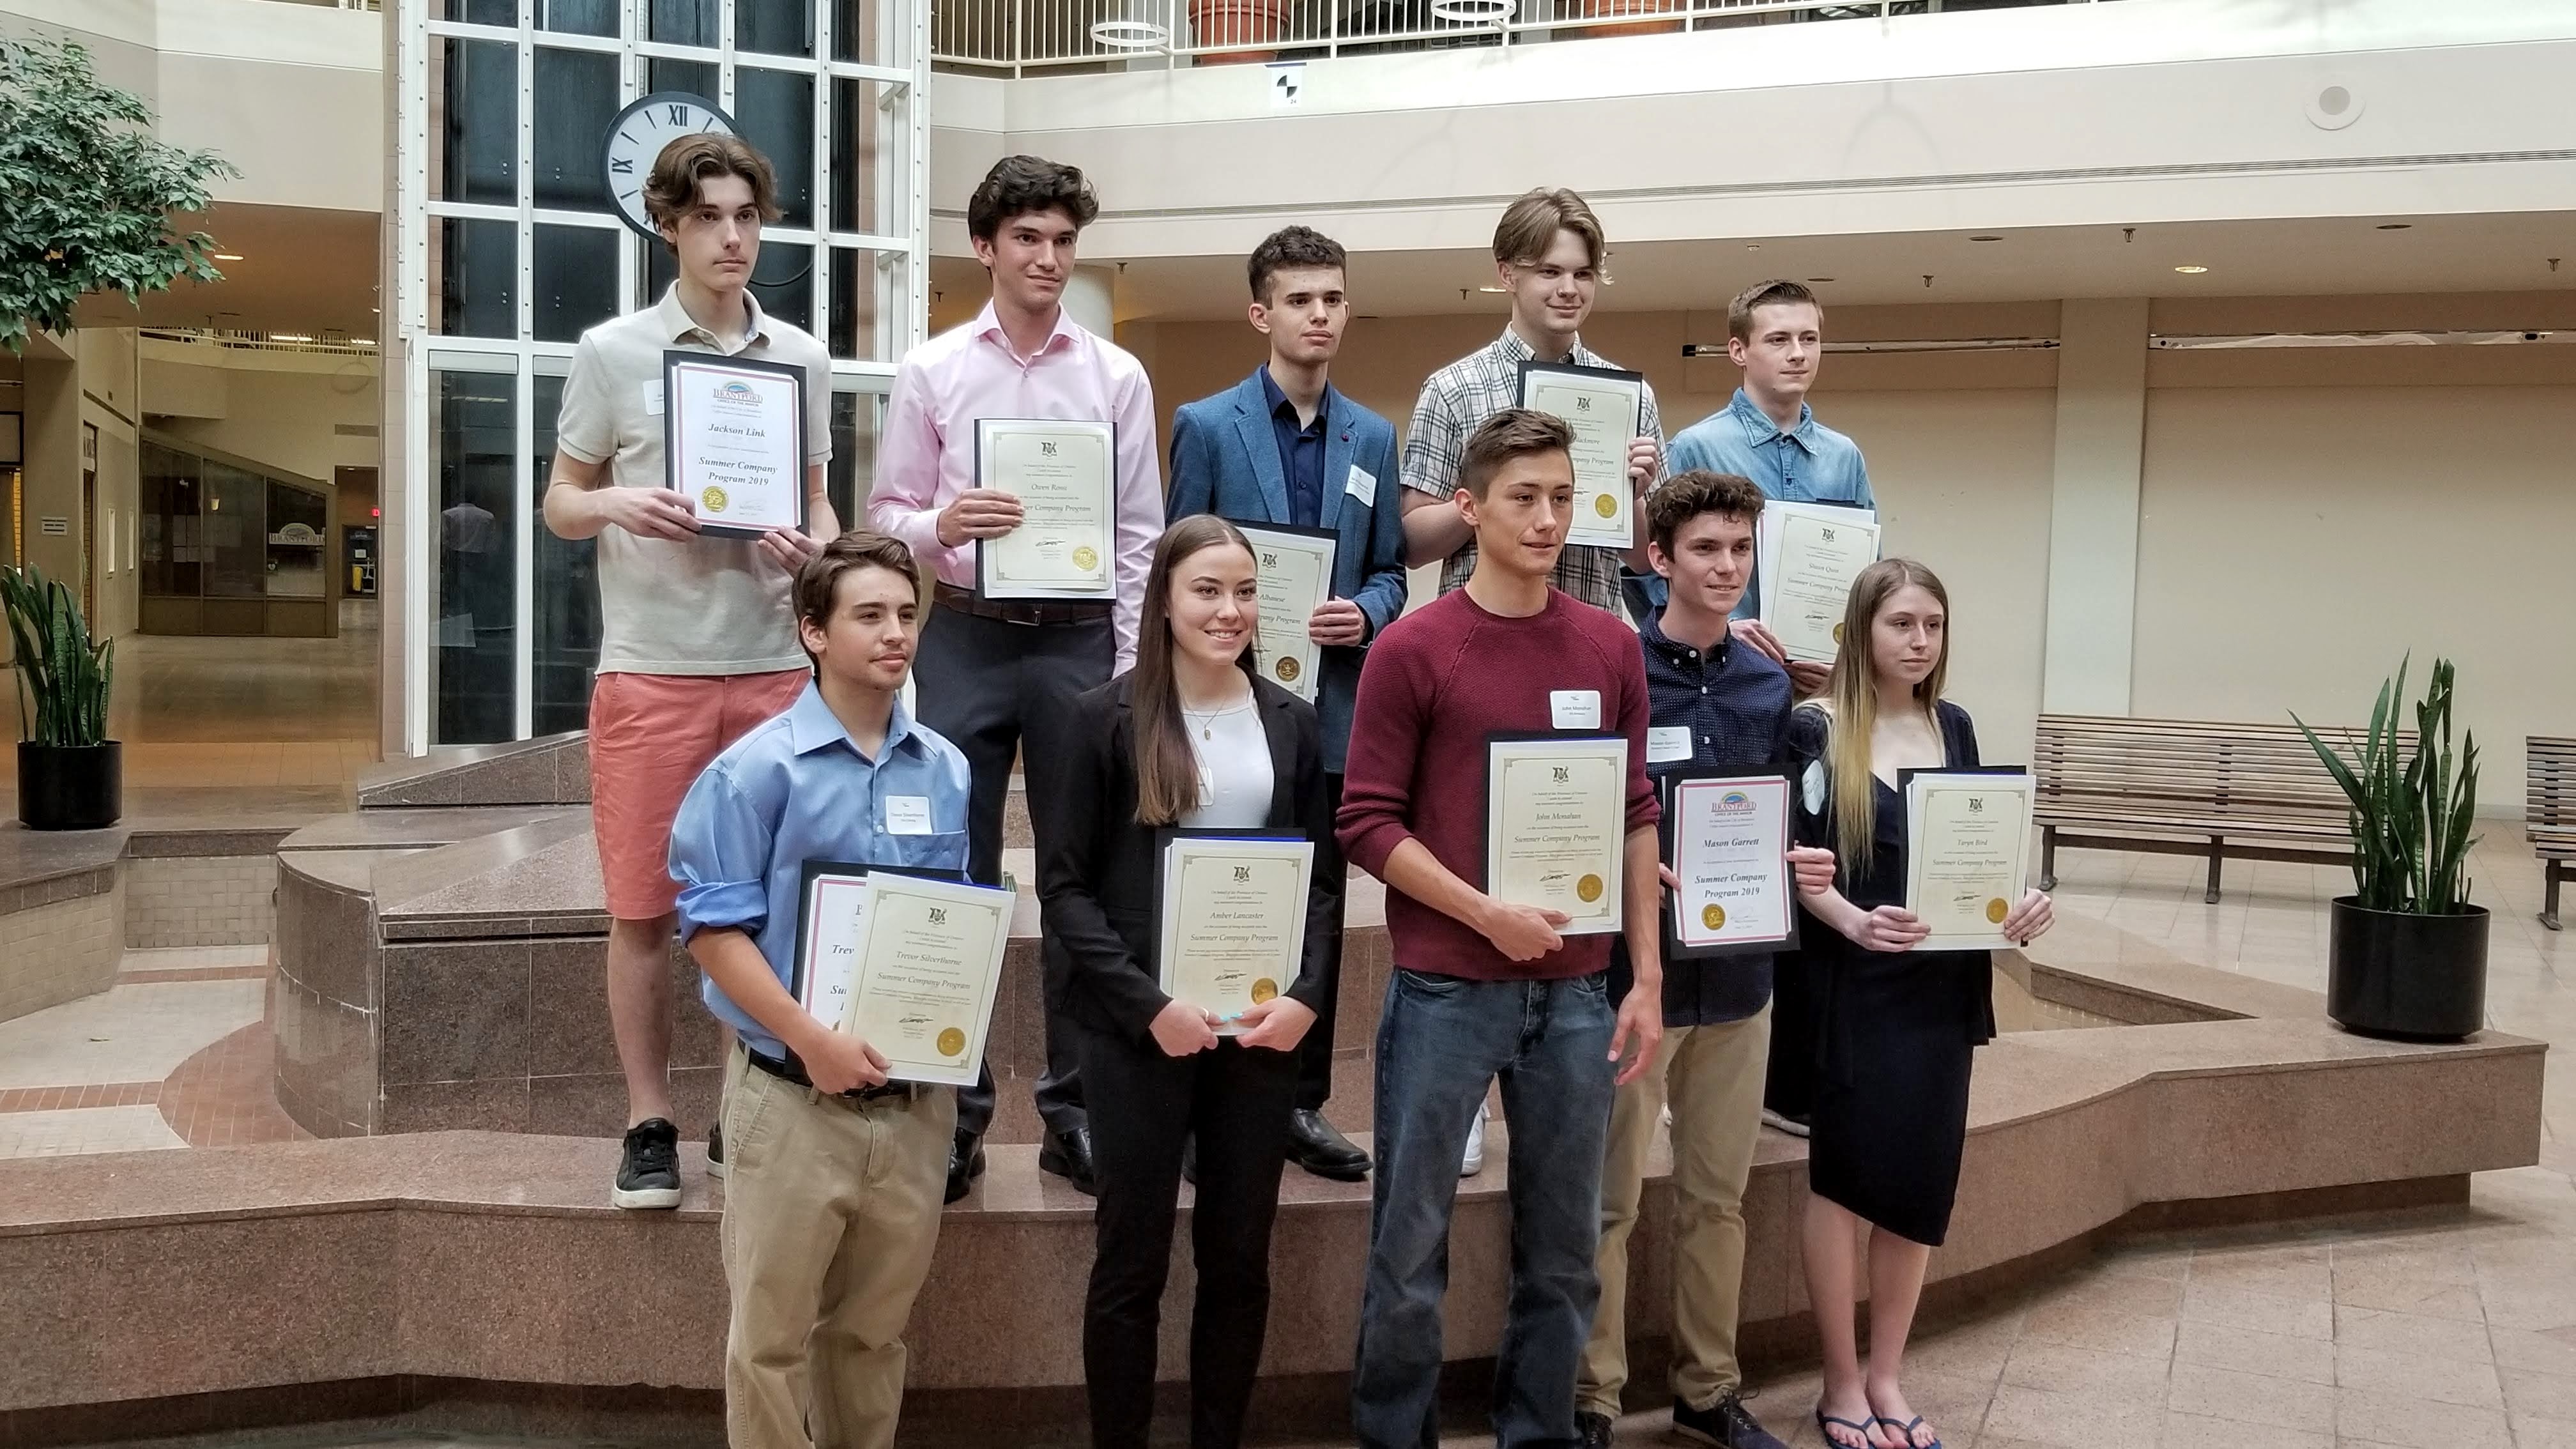 A photo of me and the other recipients of the Summer Business grant